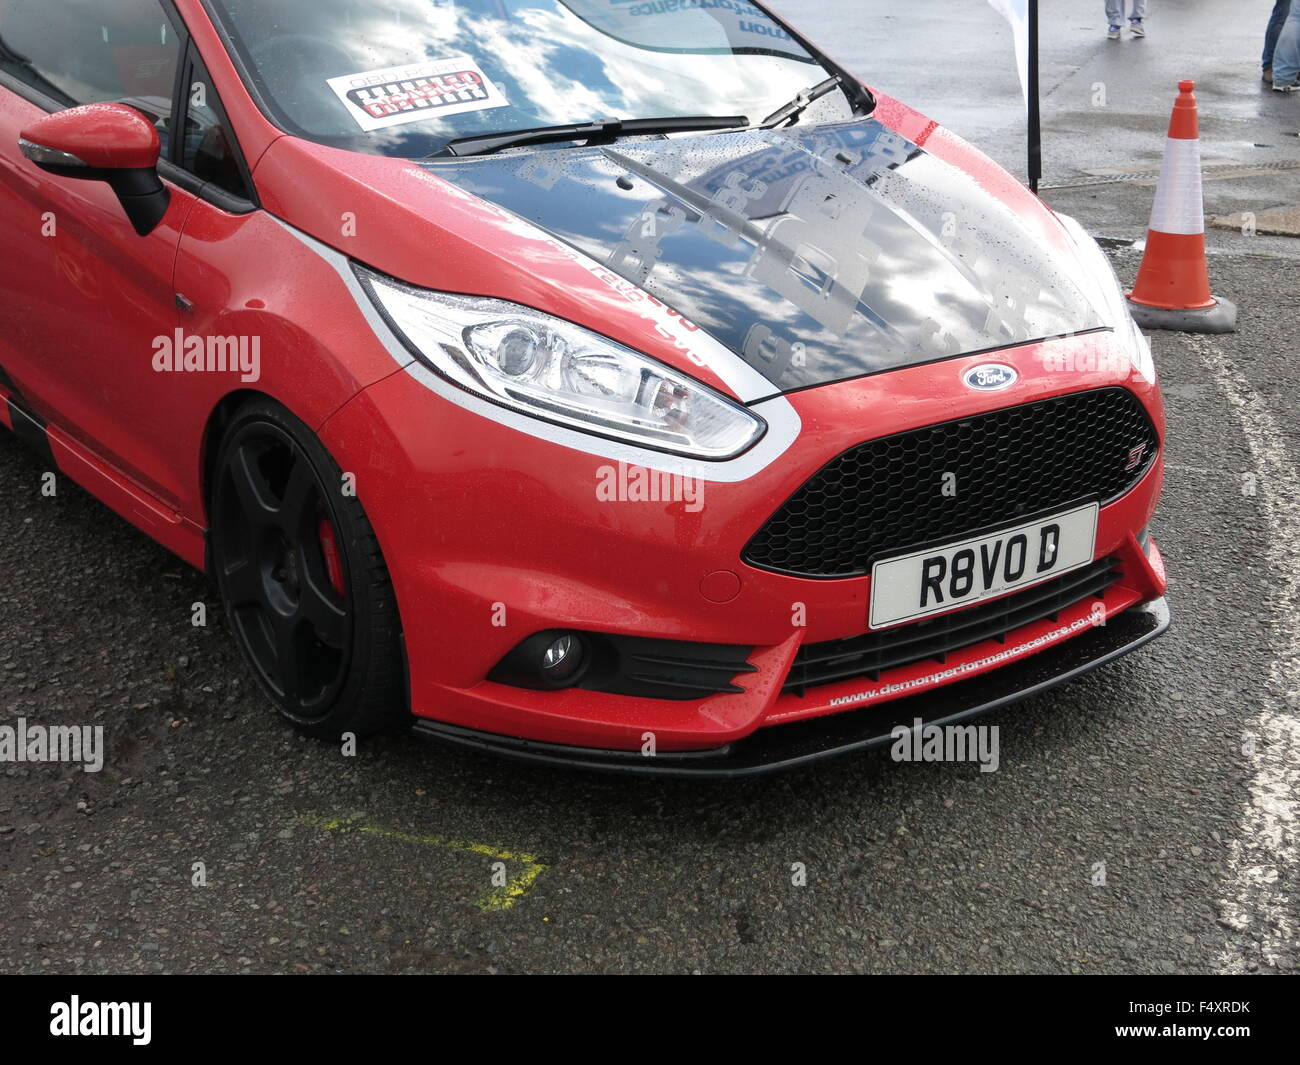 Ford Fiesta Road Car modified - in race red paintwork - with carbon fibre black bonnet and lower spoiler and aftermarket alloy wheels - on display at donnington circuit Stock Photo - Alamy